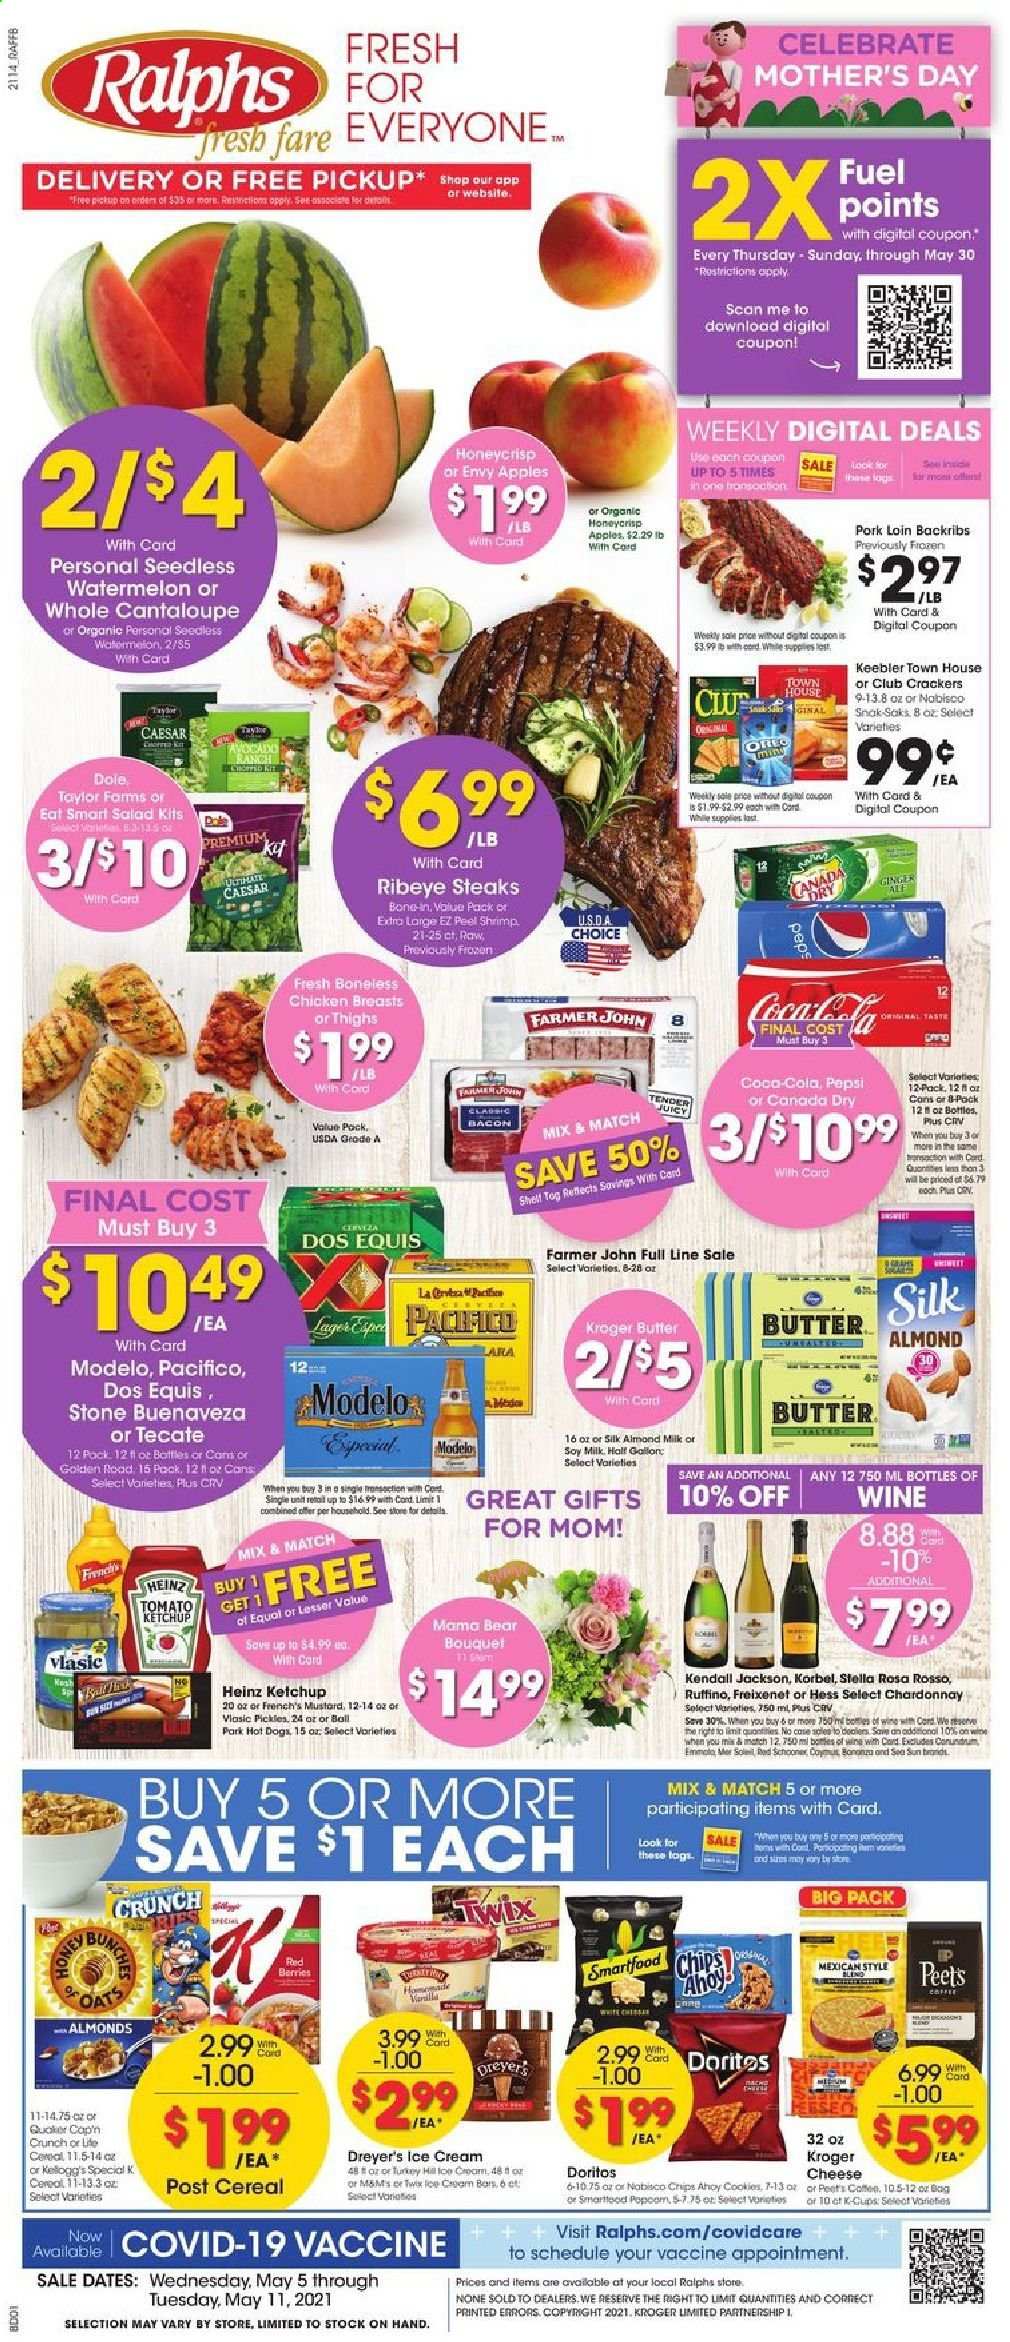 thumbnail - Ralphs Flyer - 05/05/2021 - 05/11/2021 - Sales products - cantaloupe, ginger, salad, Dole, apples, avocado, watermelon, shrimps, hot dog, Quaker, bacon, Oreo, almond milk, soy milk, butter, ice cream, Twix, crackers, Keebler, Doritos, Smartfood, oats, Heinz, cereals, Cap'n Crunch, mustard, ketchup, Canada Dry, Coca-Cola, Pepsi, tea, coffee capsules, K-Cups, white wine, Chardonnay, wine, beer, Dos Equis, Modelo, chicken breasts, beef meat, steak, ribeye steak, pork loin, pork meat, bouquet. Page 1.